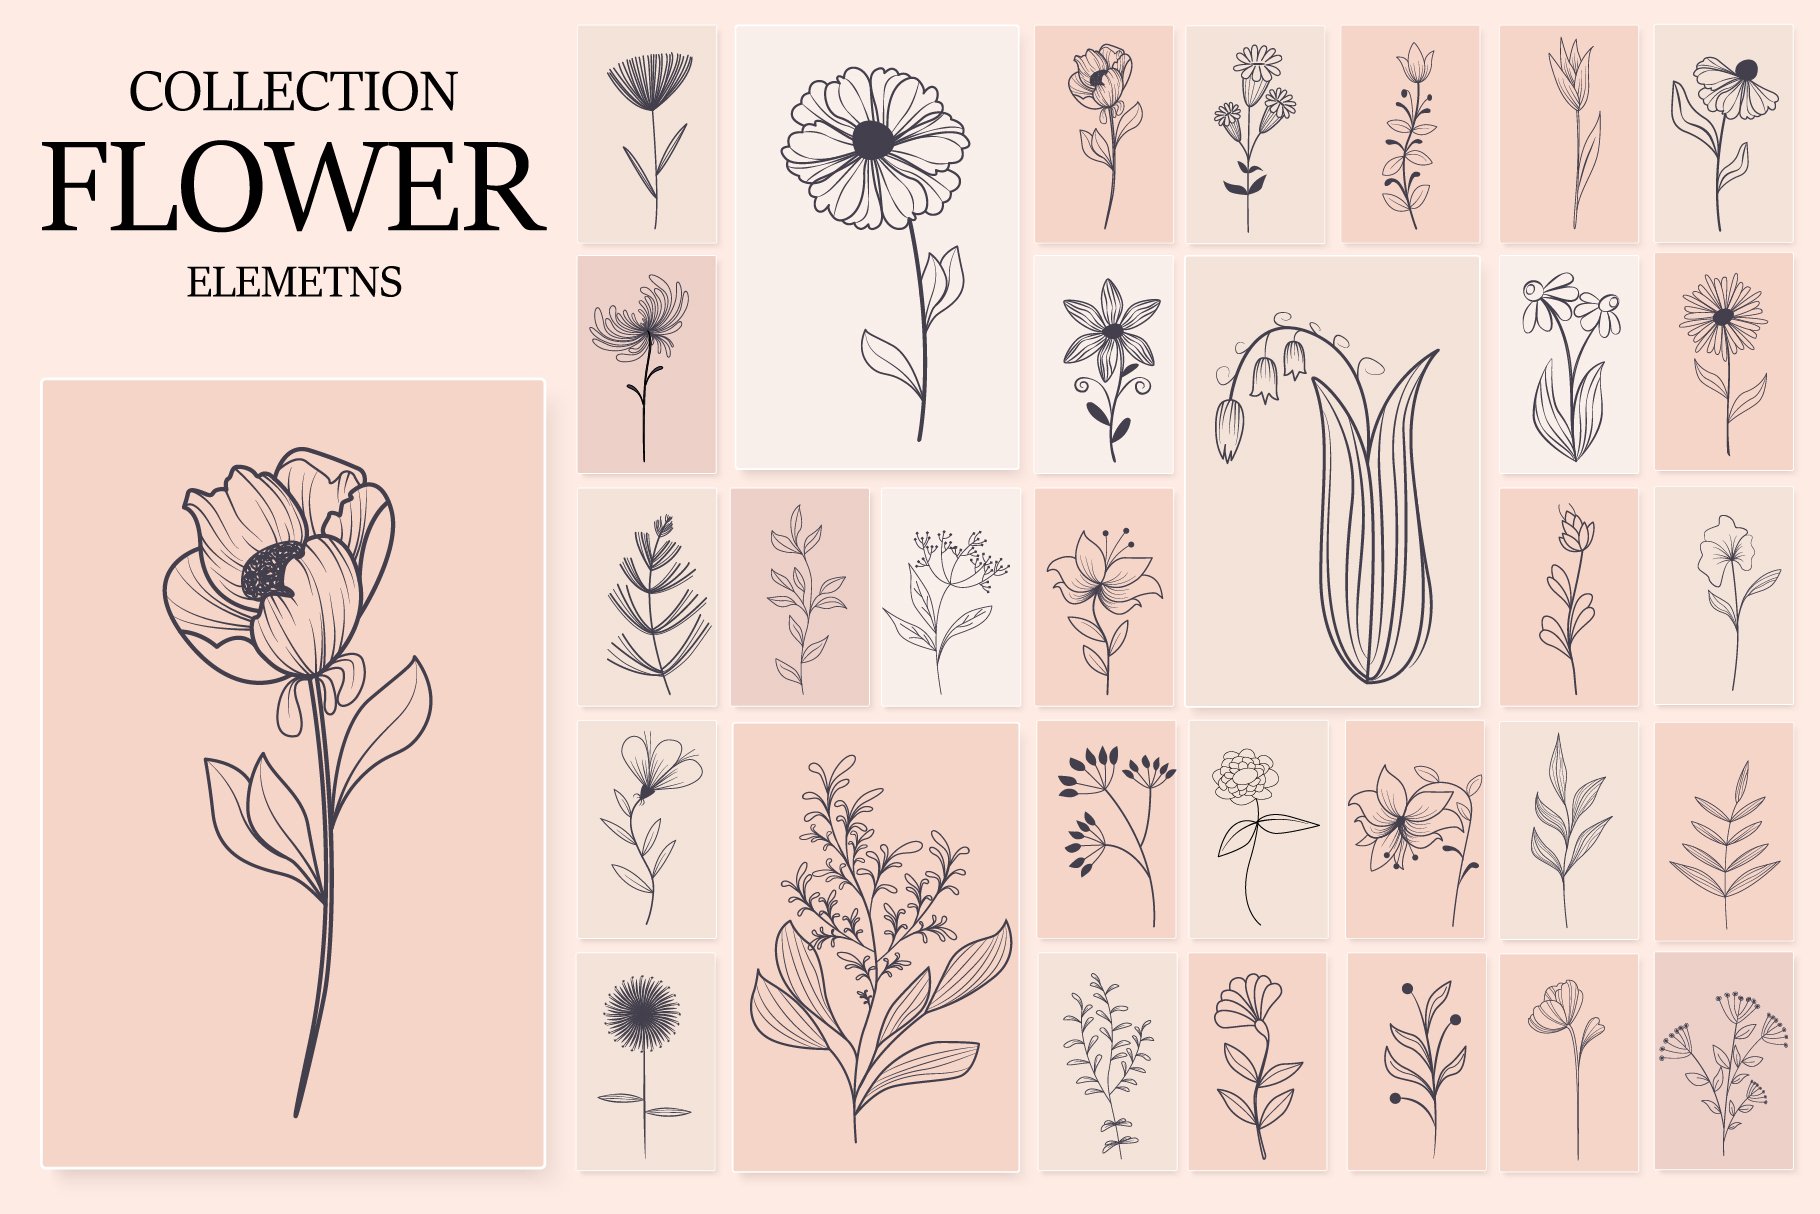 Nice elegant flowers collection.